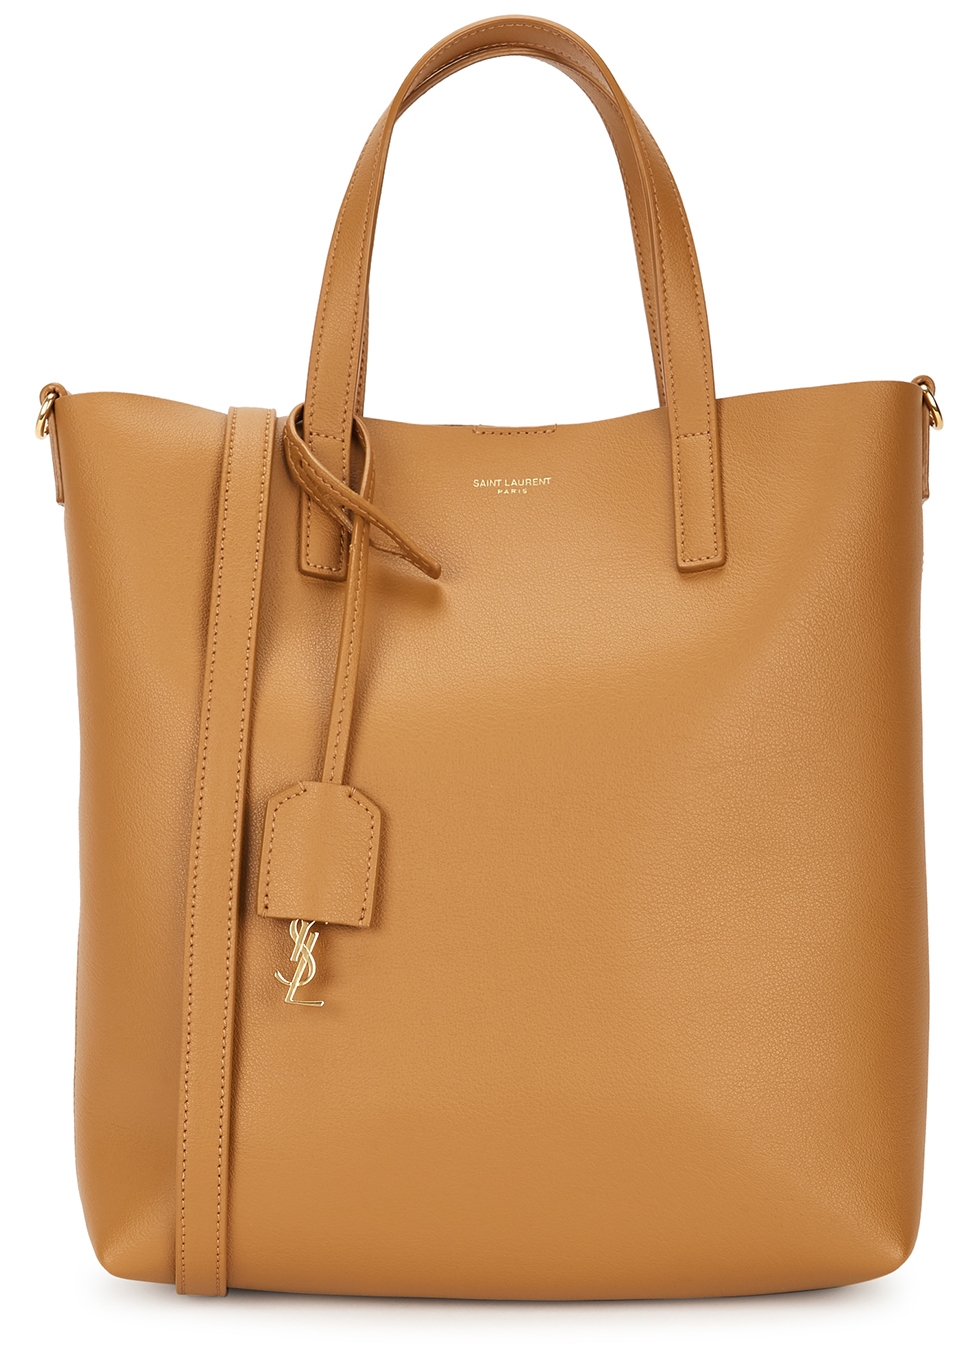 Toy mustard leather tote